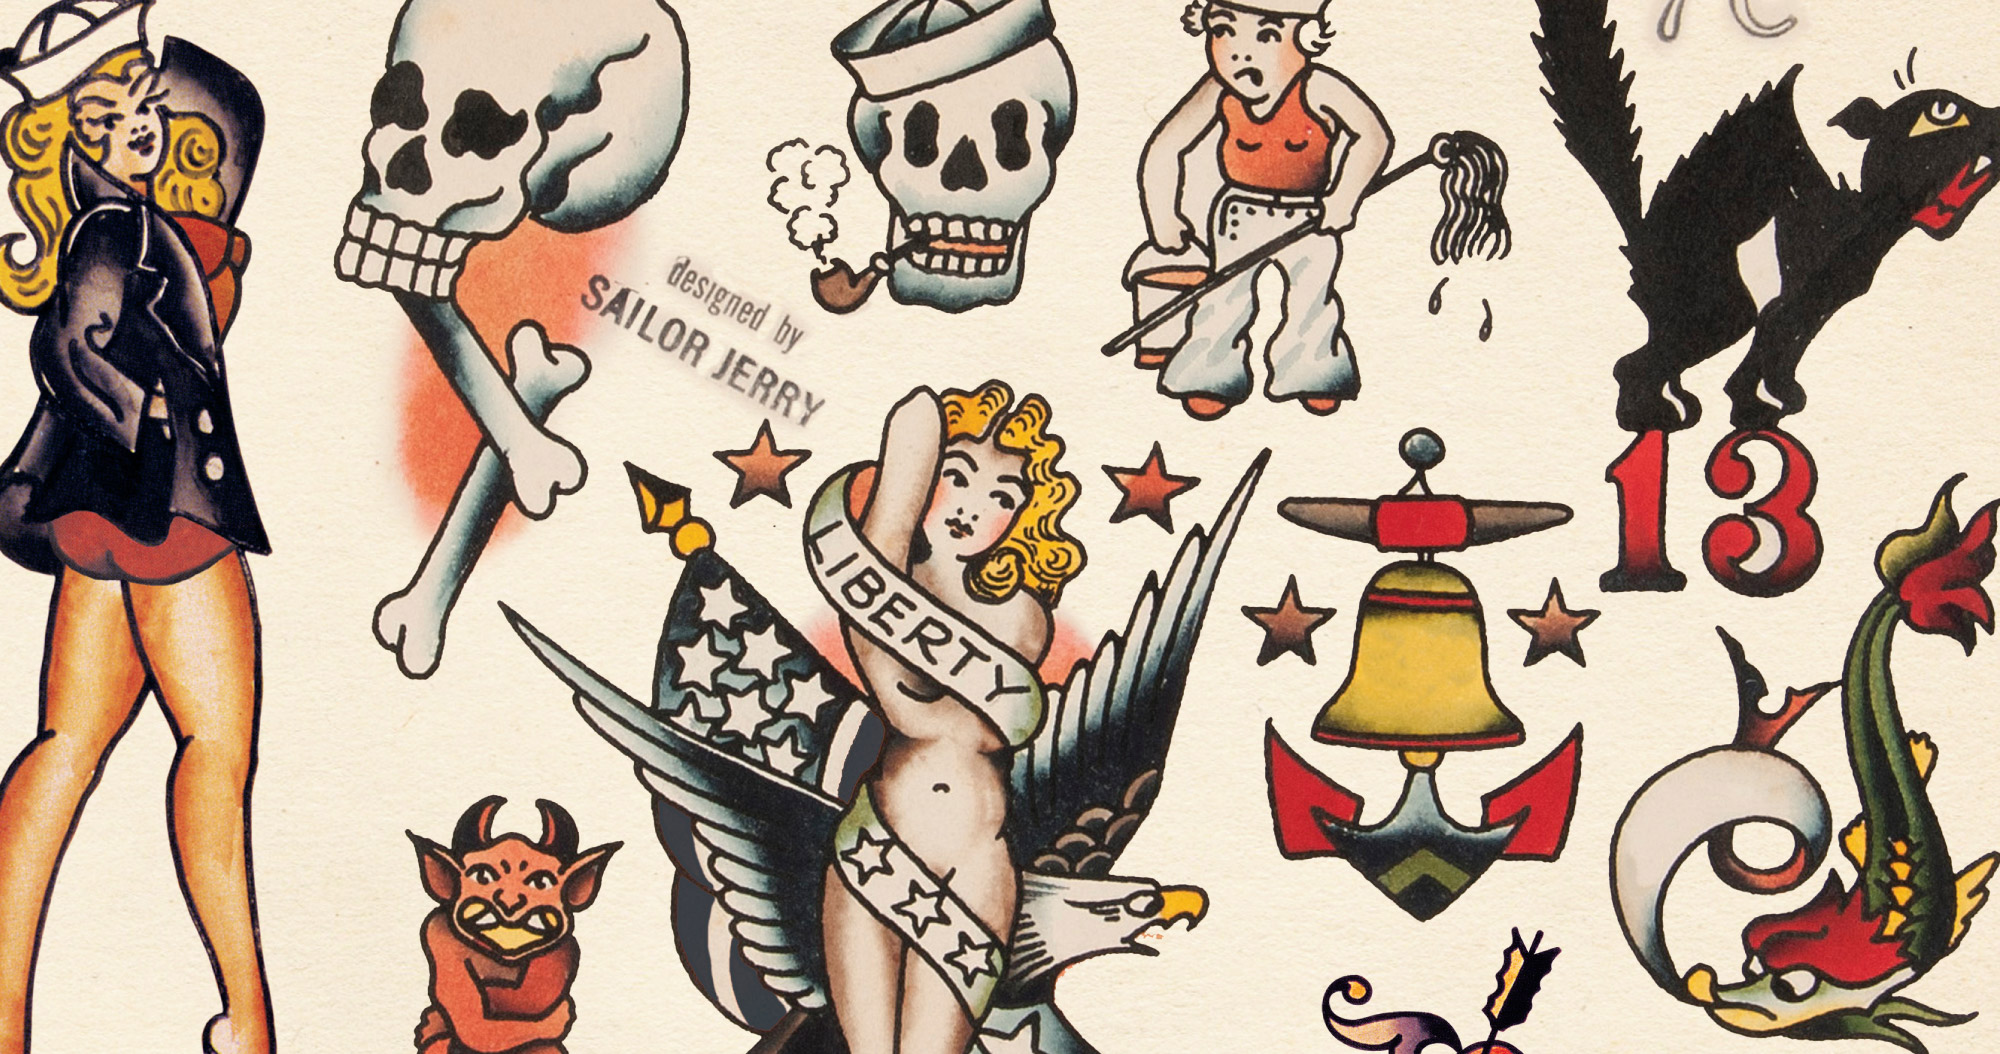 Sailor Jerry Sleeve by NathanH0303 on DeviantArt